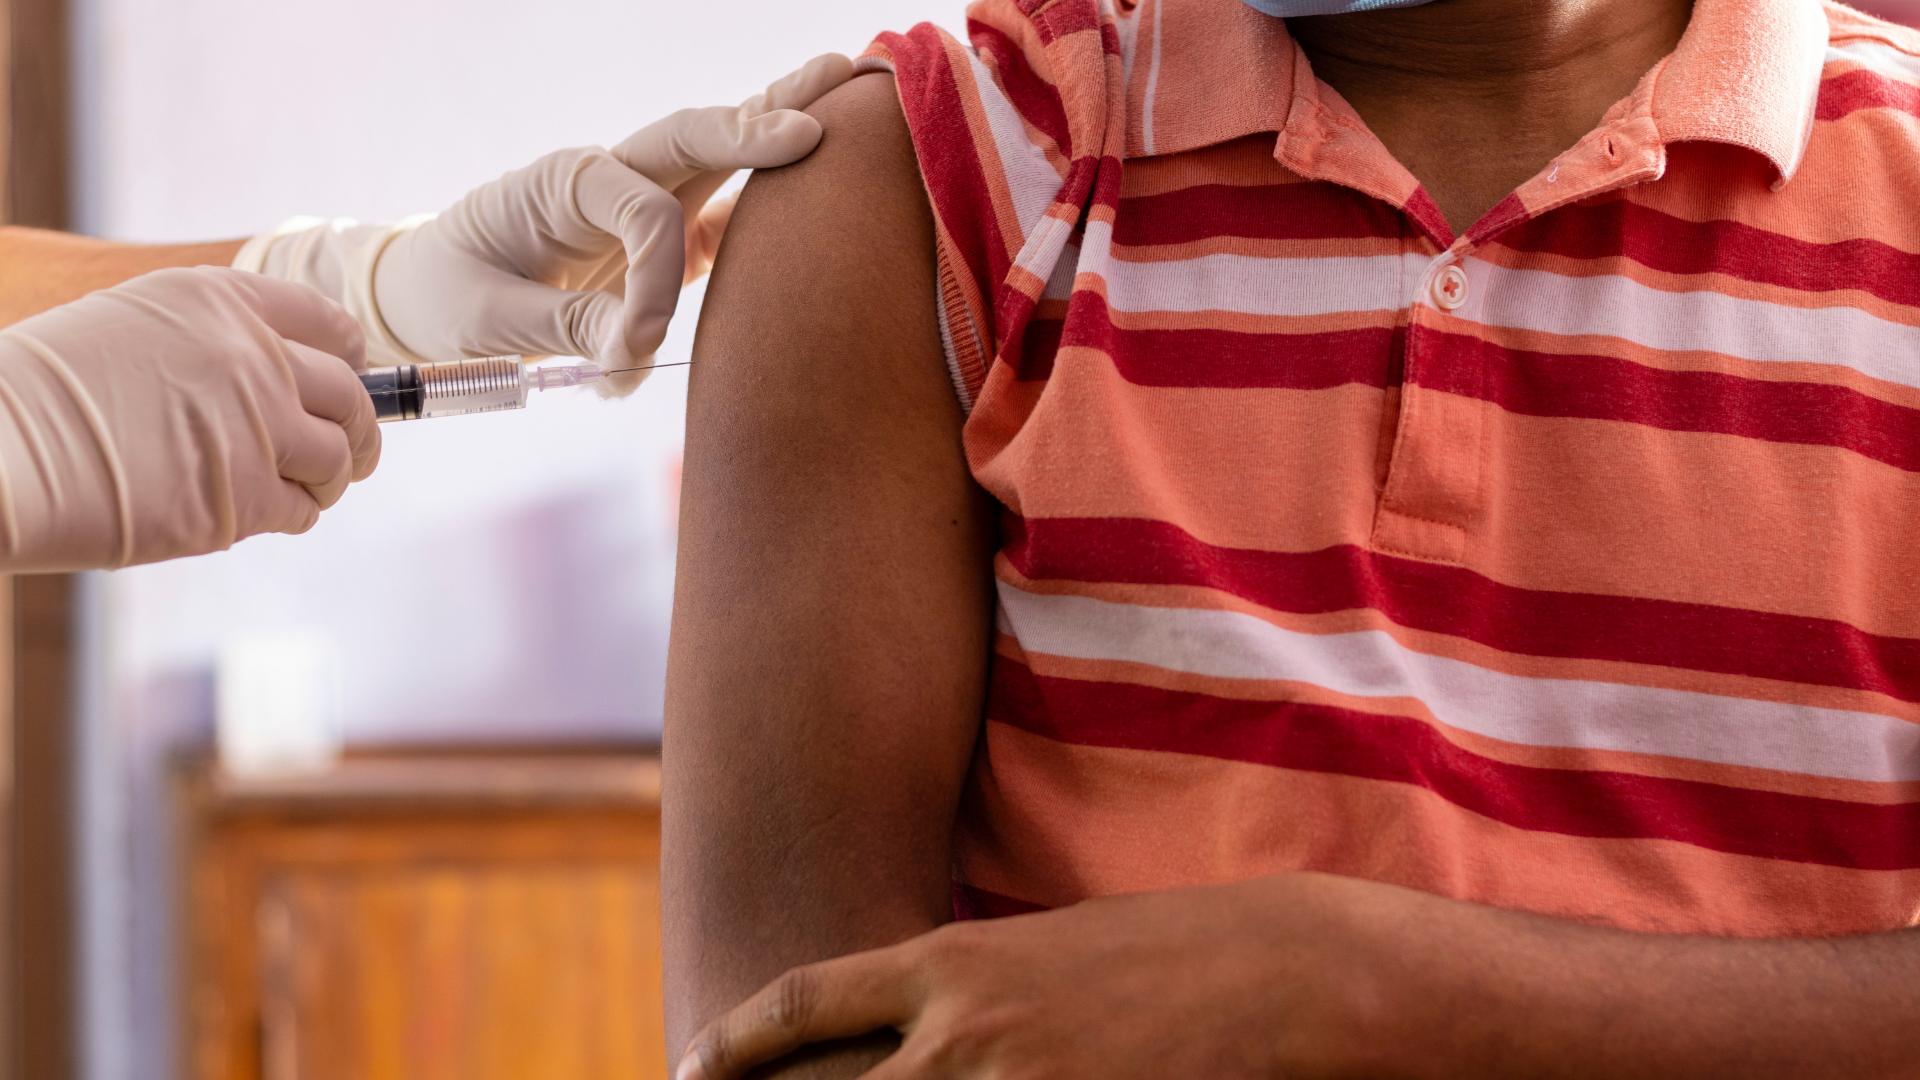 To Achieve Vaccine Equity, “CEAL” Examines Barriers to Vaccination